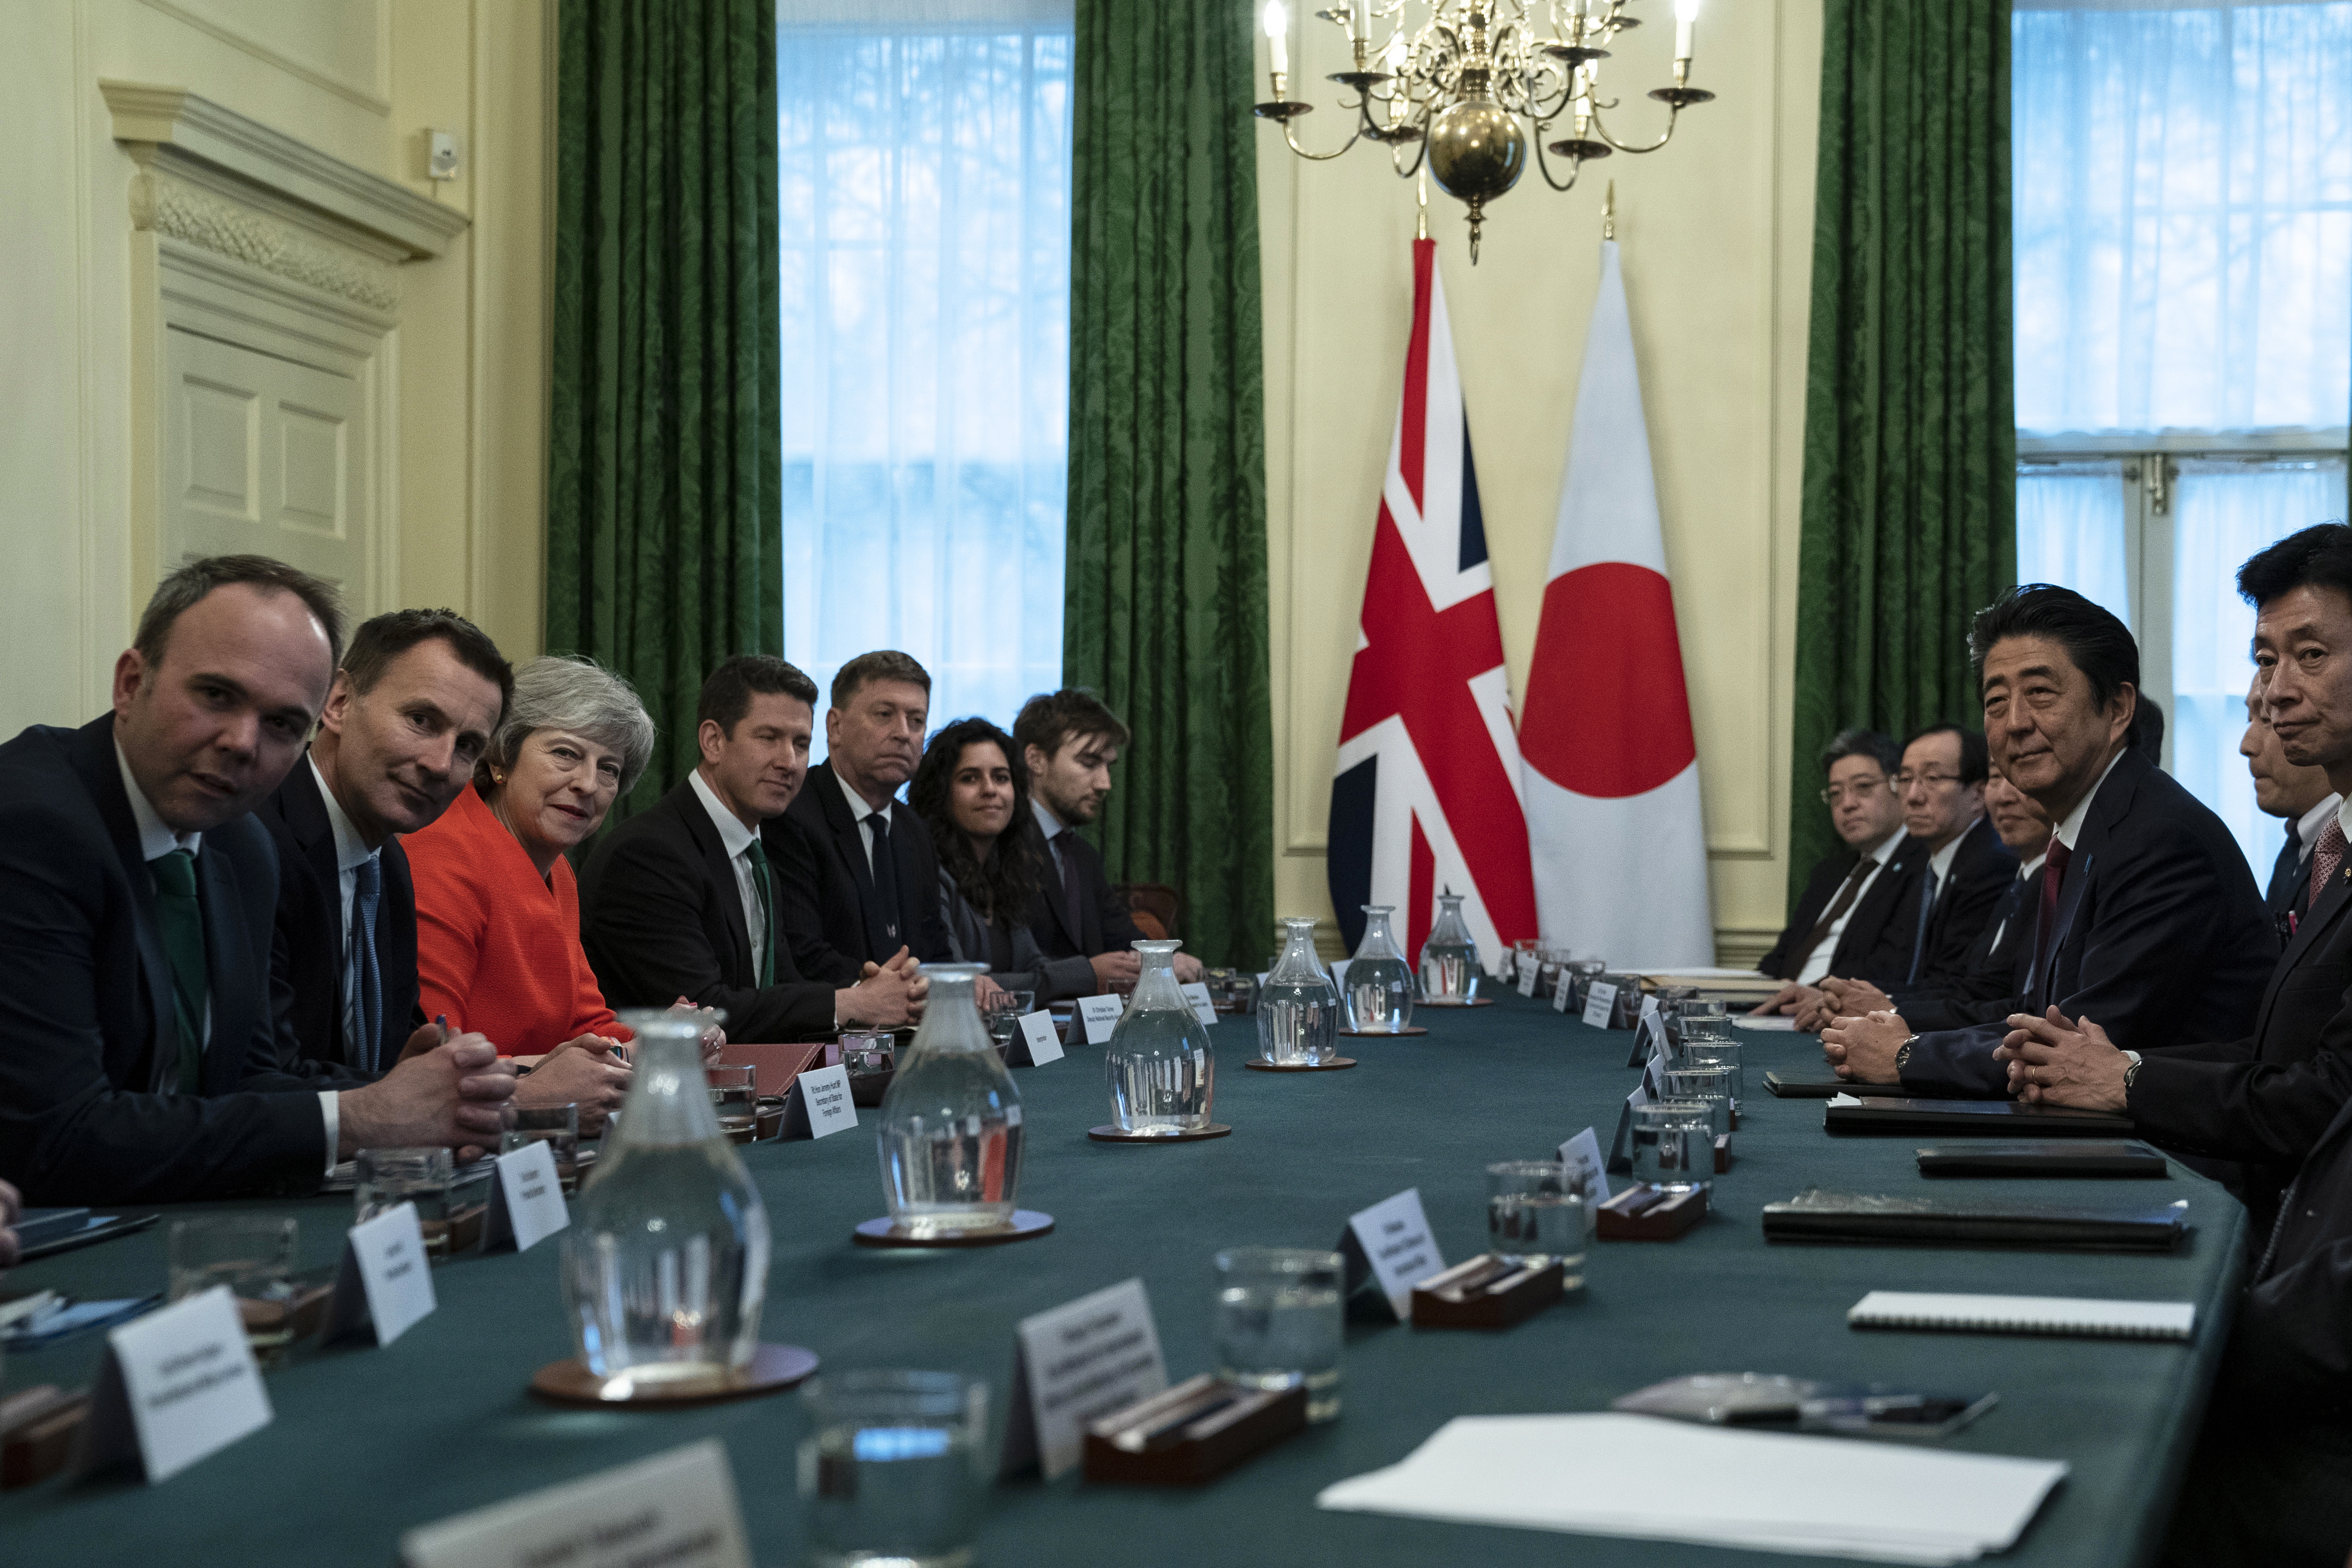 epa07273484 British Prime Minister Theresa May (3-L) with Prime Minister of Japan Shinzo Abe (2-R) during a meeting in the Cabinet Room of 10 Downing Street in London, Britain, 10 January 2019. Prime Minister Abe is on an official visit to Britain.  EPA/WILL OLIVER / POOL